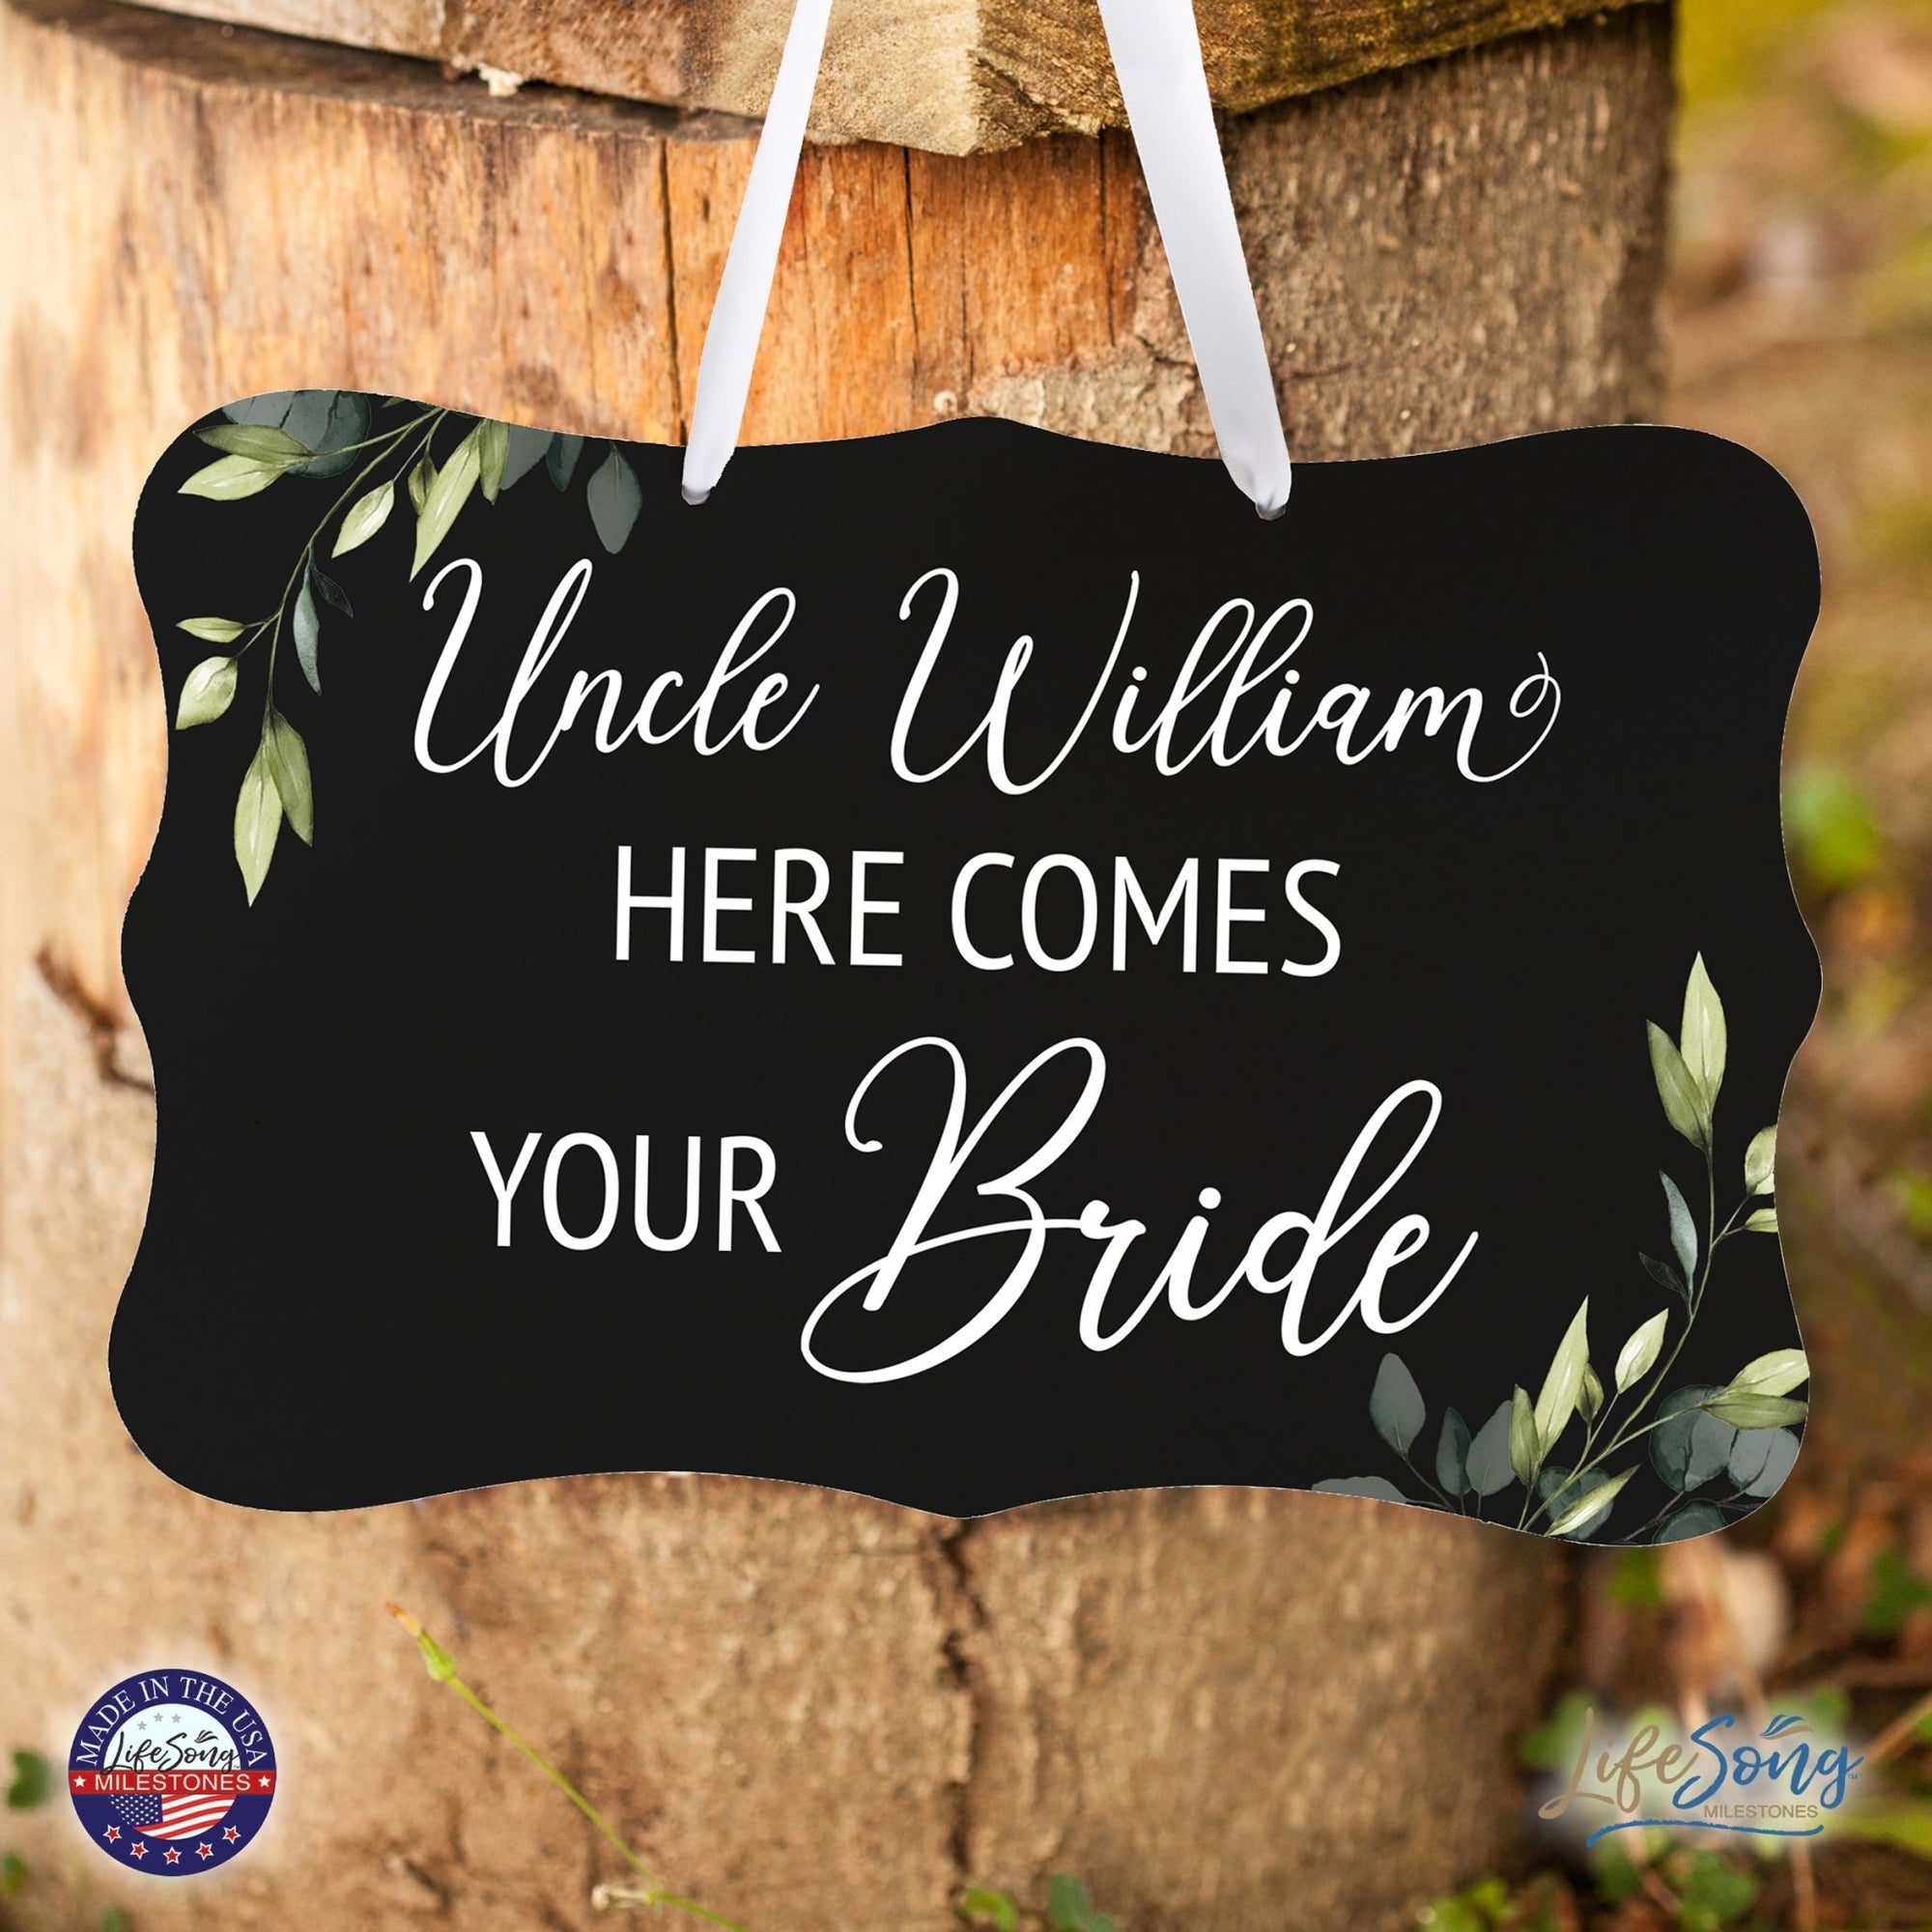 Custom Wall Hanging Signs For Wedding Ceremony, Reception, Bridal Shower 8x12| Here Comes Your Bride - LifeSong Milestones